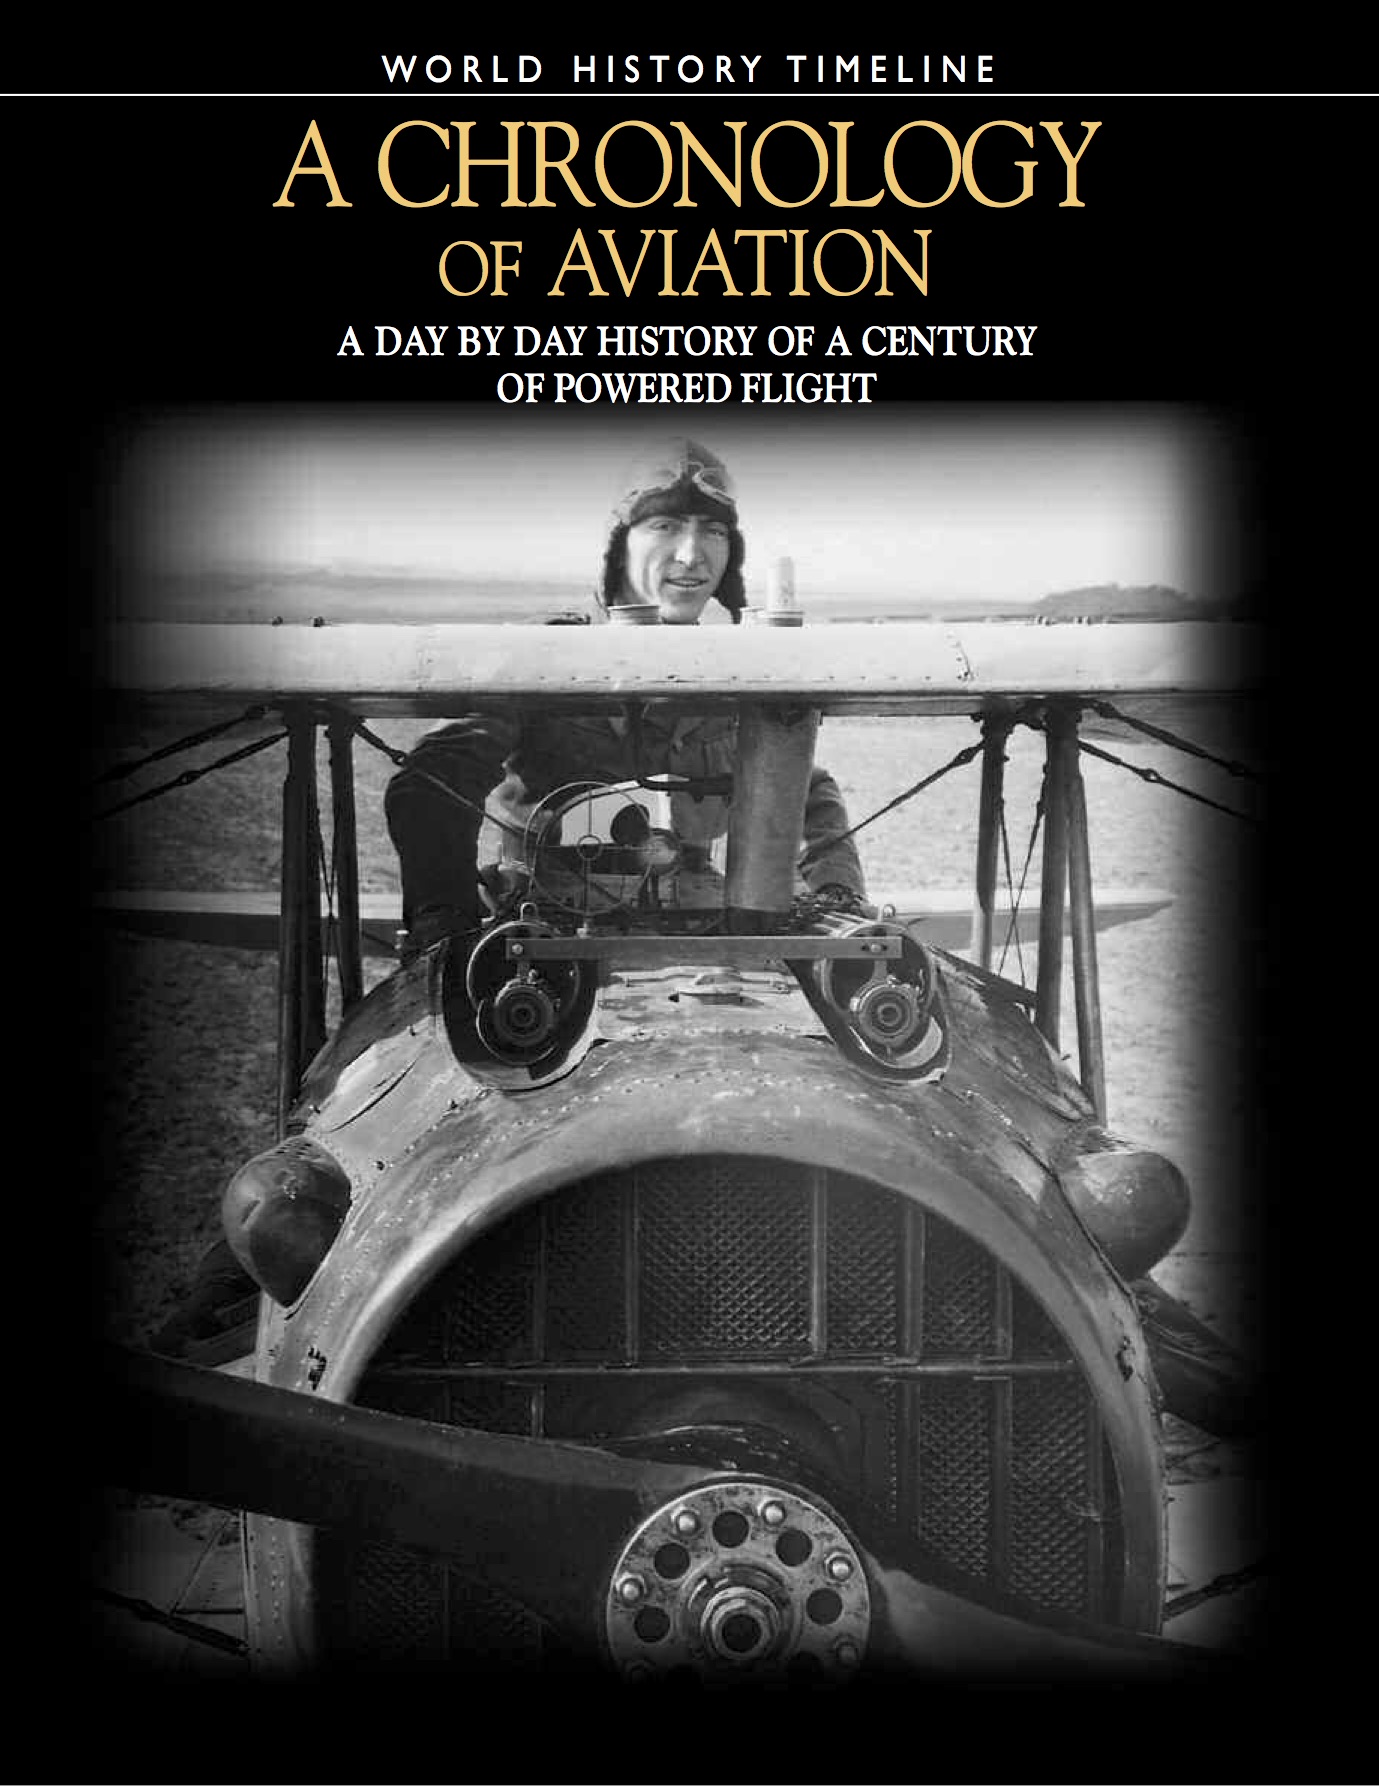 A Chronology of Aviation